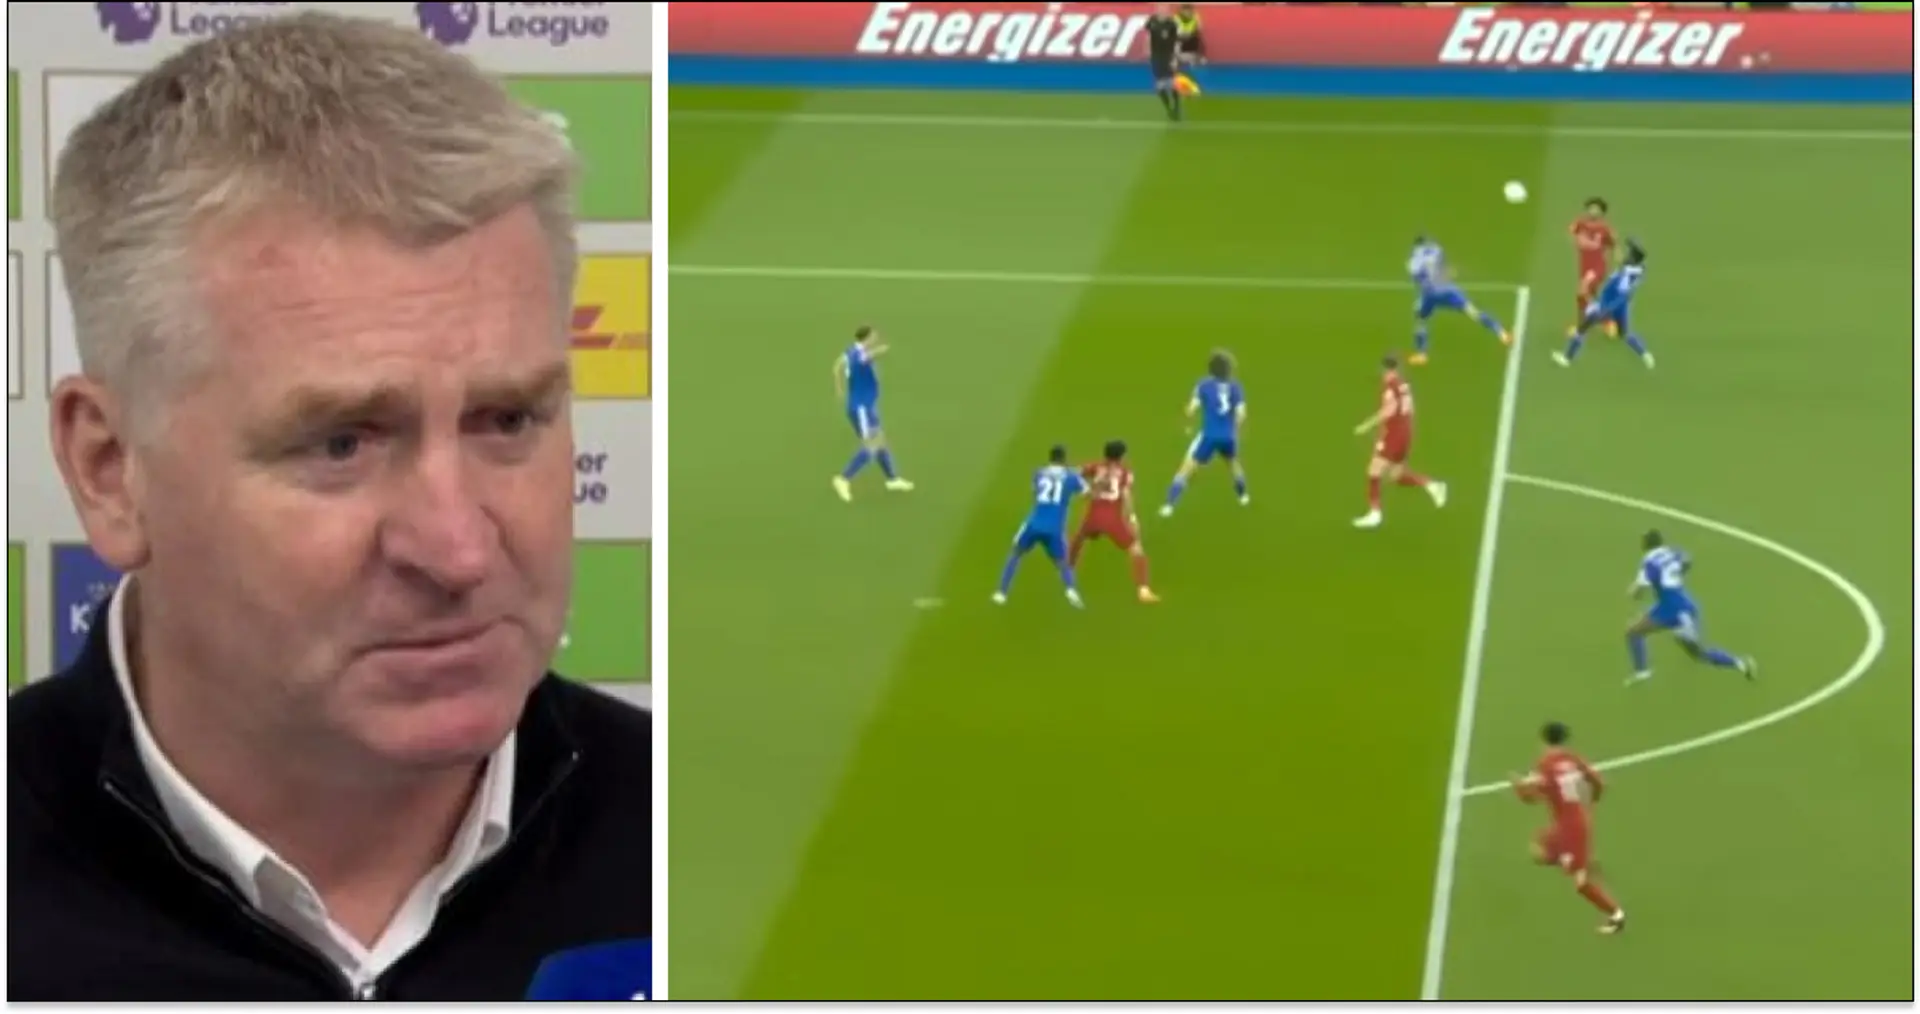 Leicester boss insists Liverpool's win undeserved — is he right? Answered through stats